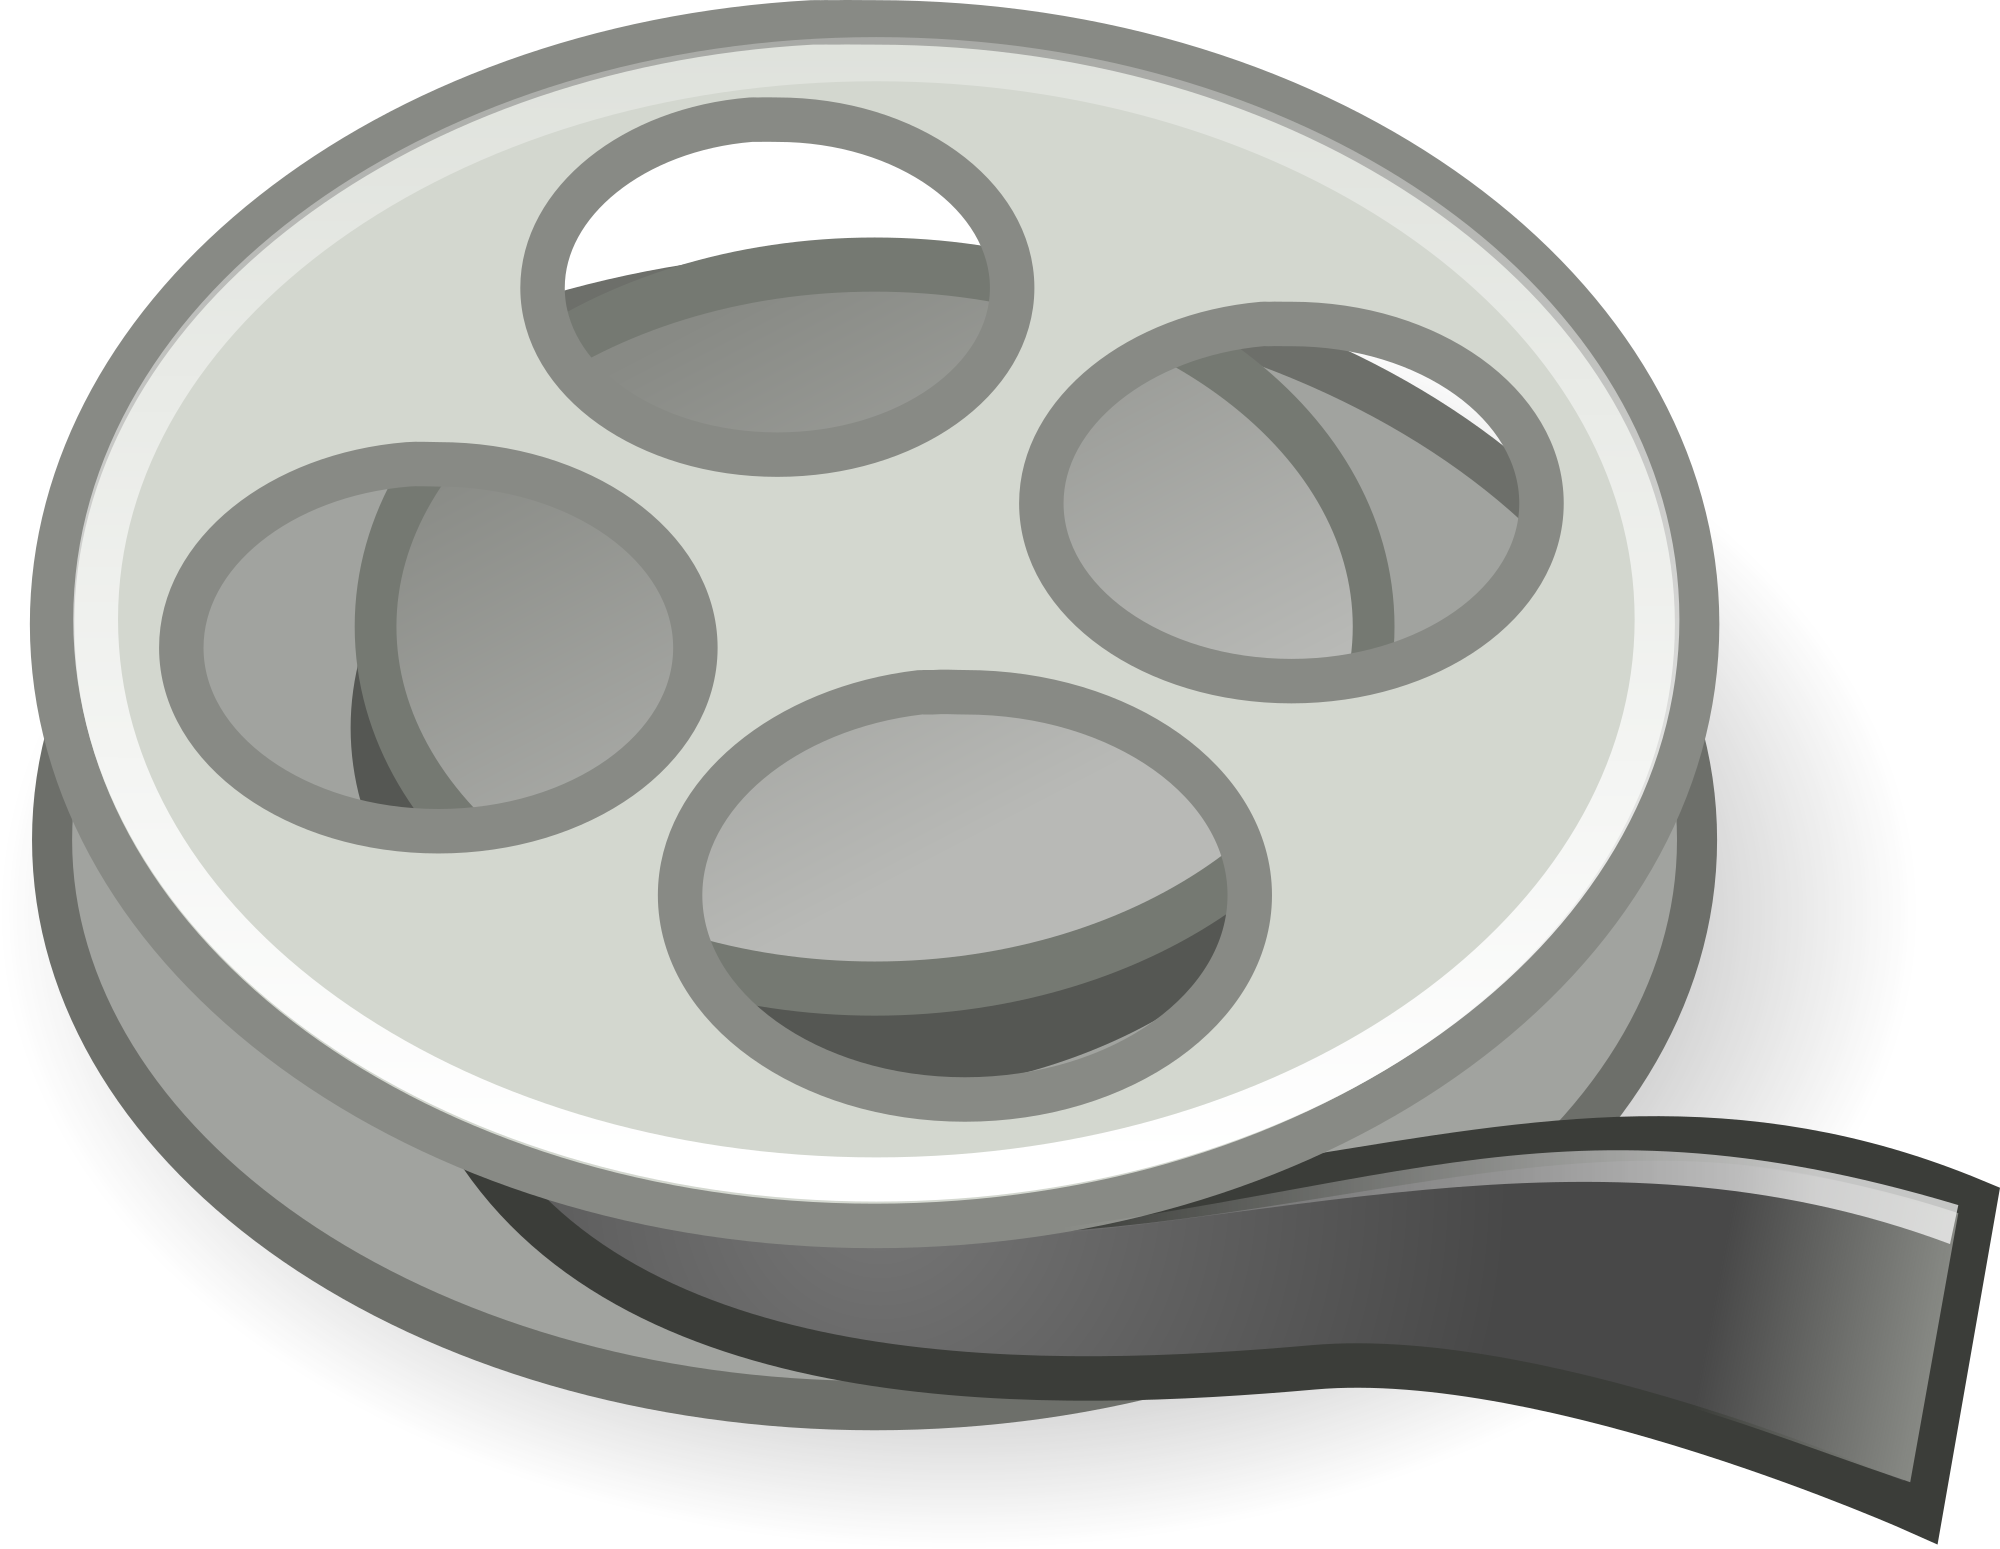 video tape clipart - photo #13